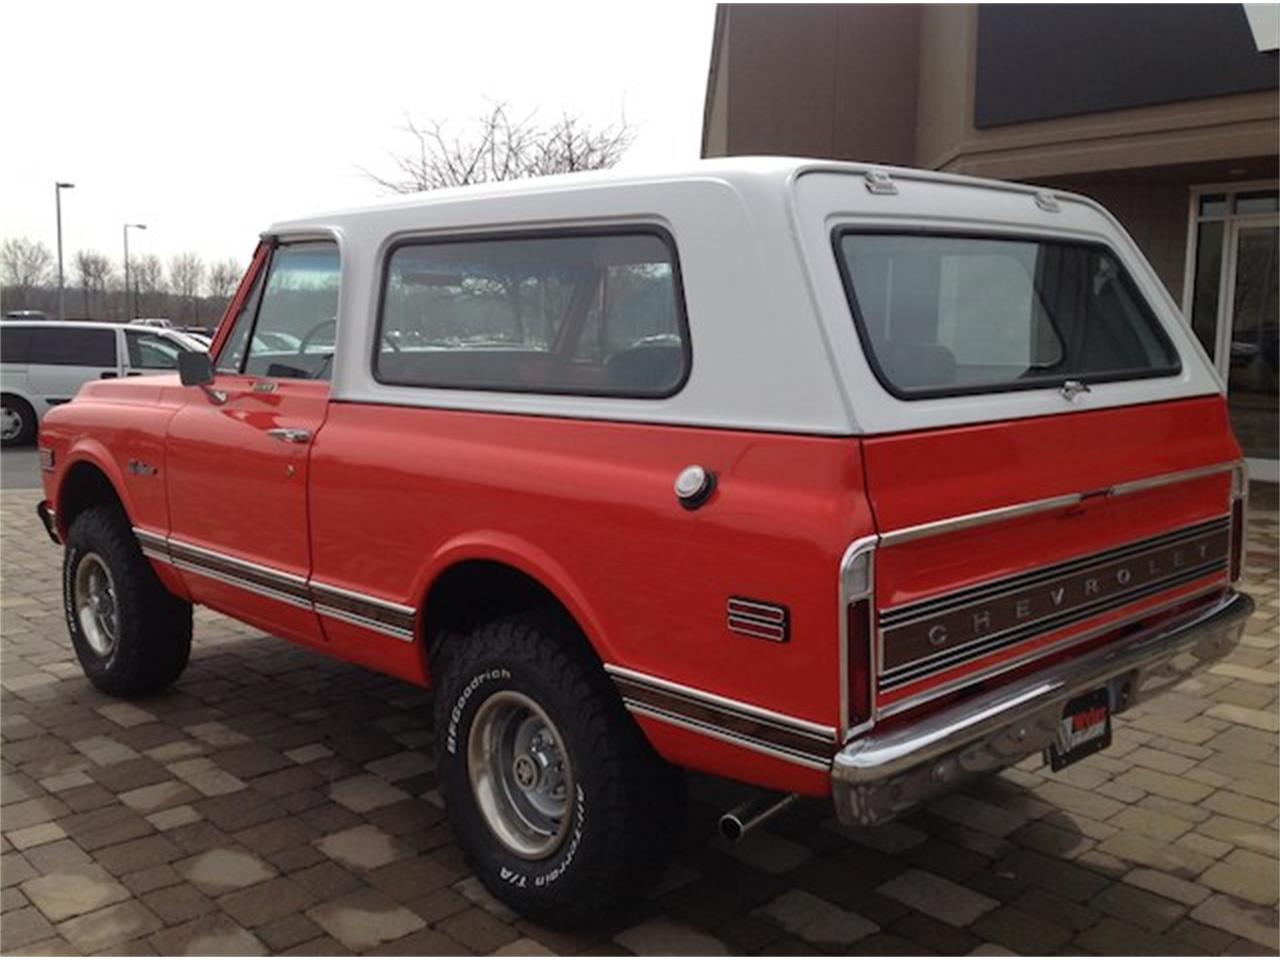 1972 Chevrolet Blazer for sale in Milford, OH – photo 28